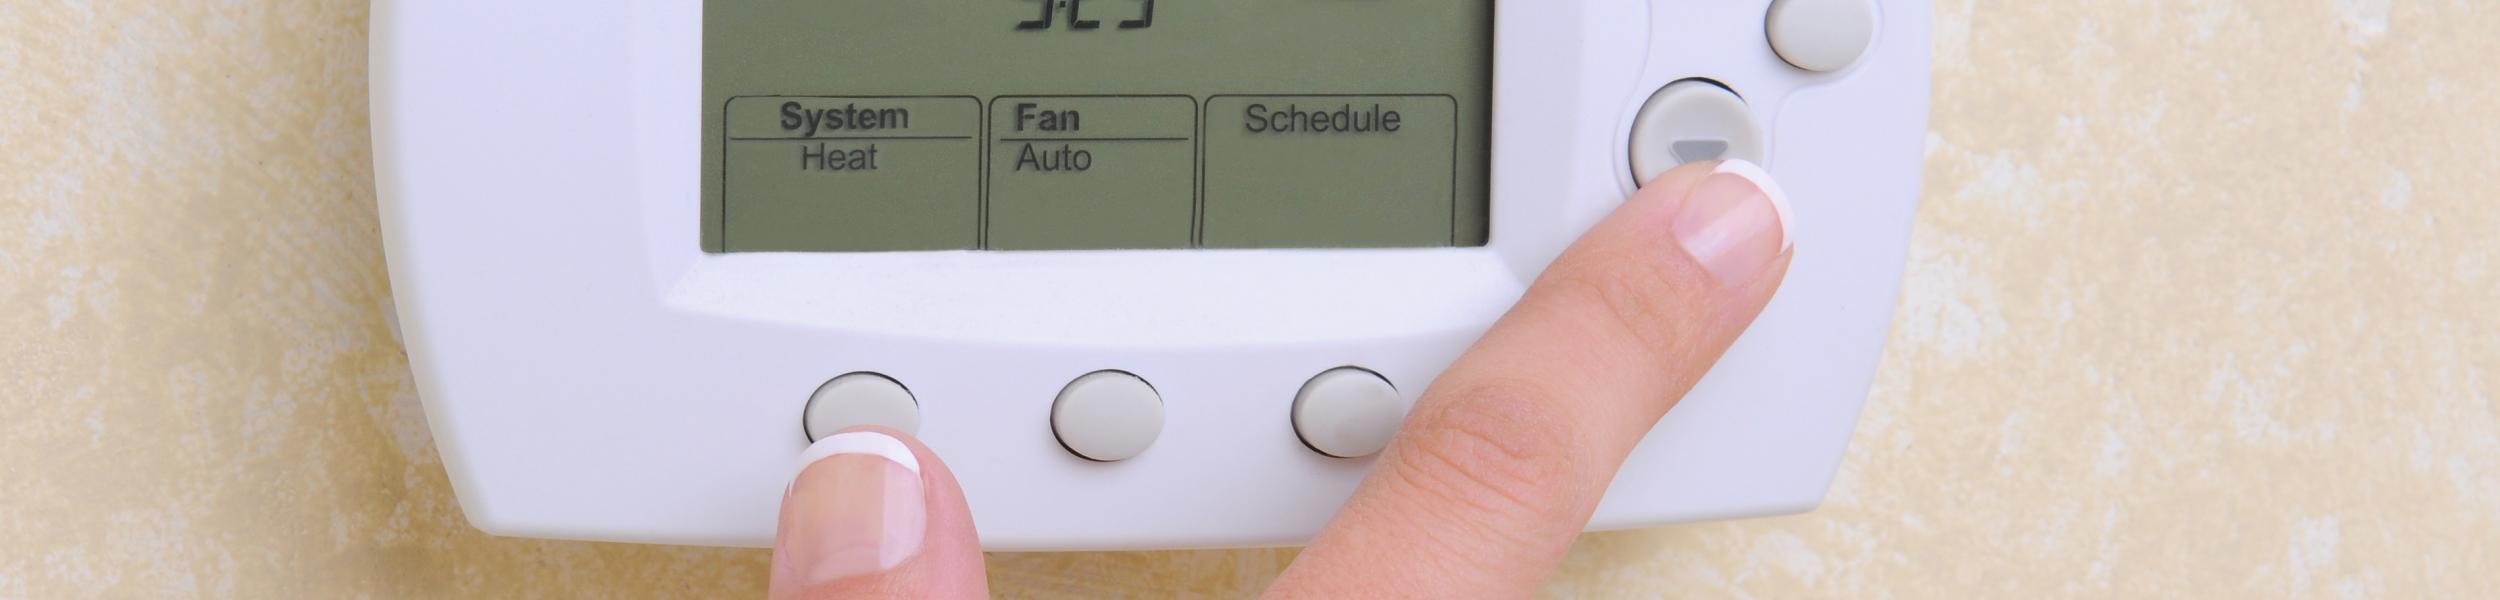 image of a person using a thermostat